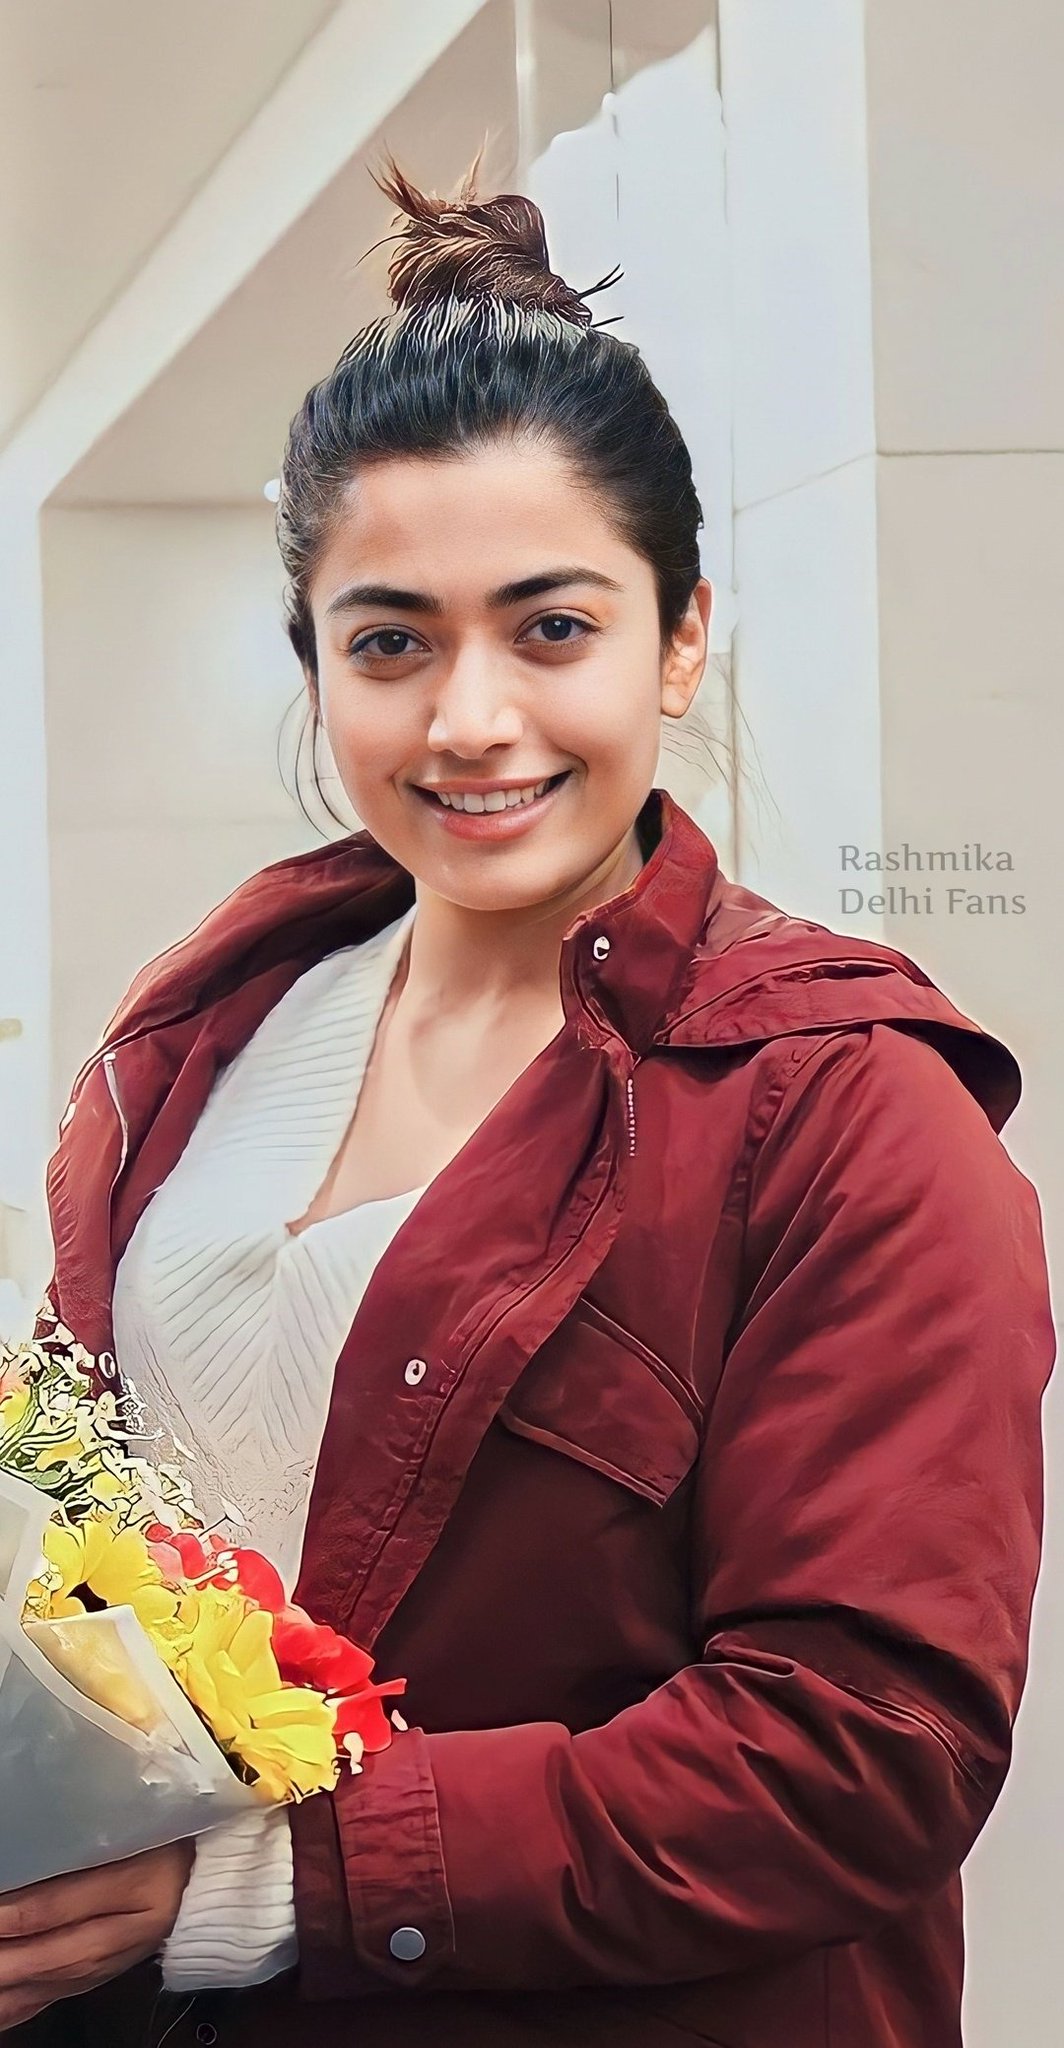 Rashmika Delhi Fans On Twitter I Think She Is The Only Actress Who Can Give Pictures With 